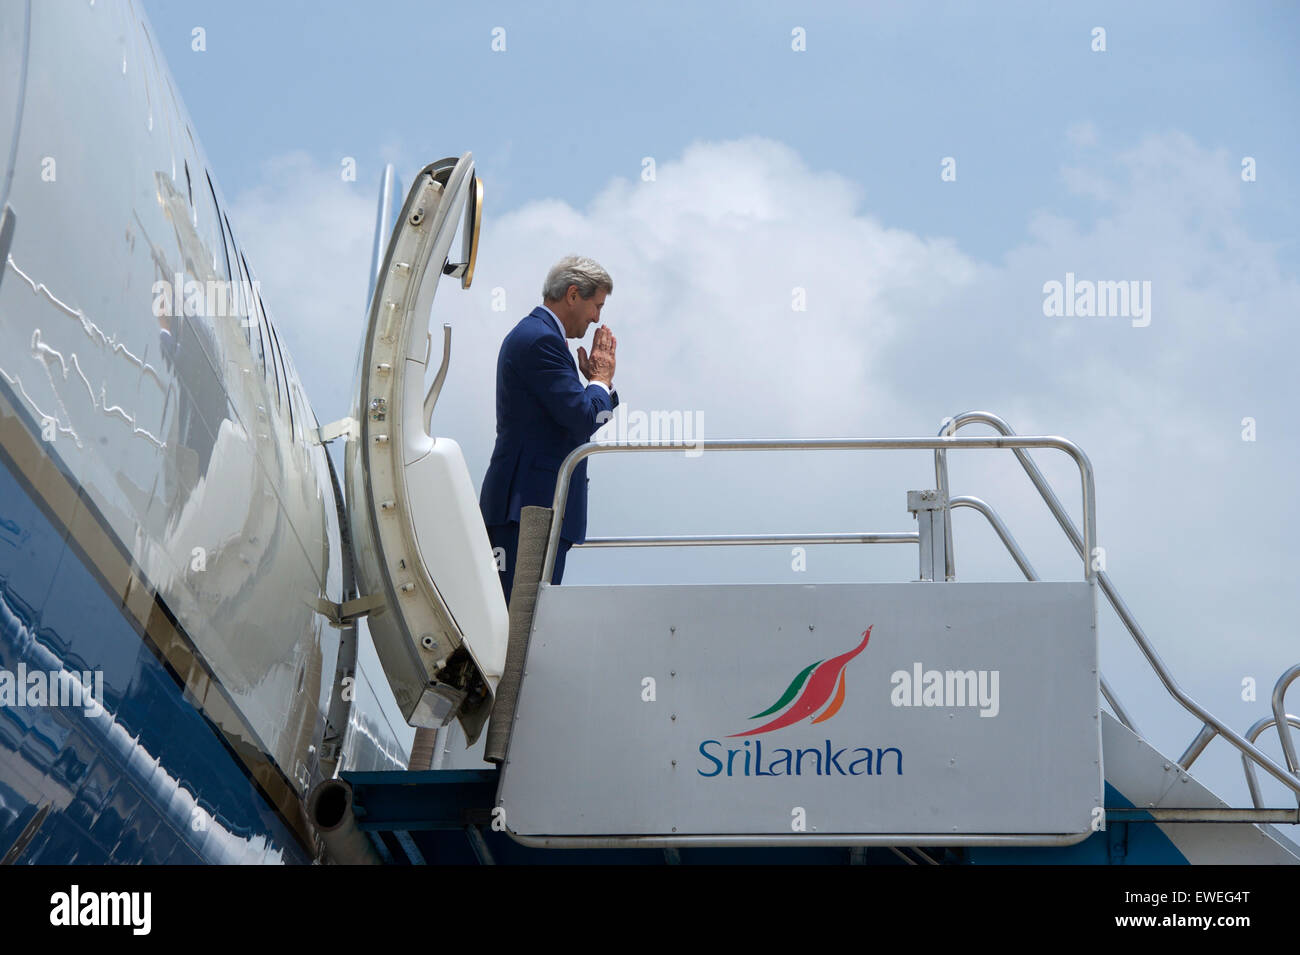 U.S. Secretary of State John Kerry makes the Ayubowan (Sinhalese) /Vanakkam (Tamil) gesture on May 3, 2015, in Colombo, Sri Lanka, as he prepares to board his airplane and depart the island-nation after the first official visit by someone in his office in 43 years. Stock Photo